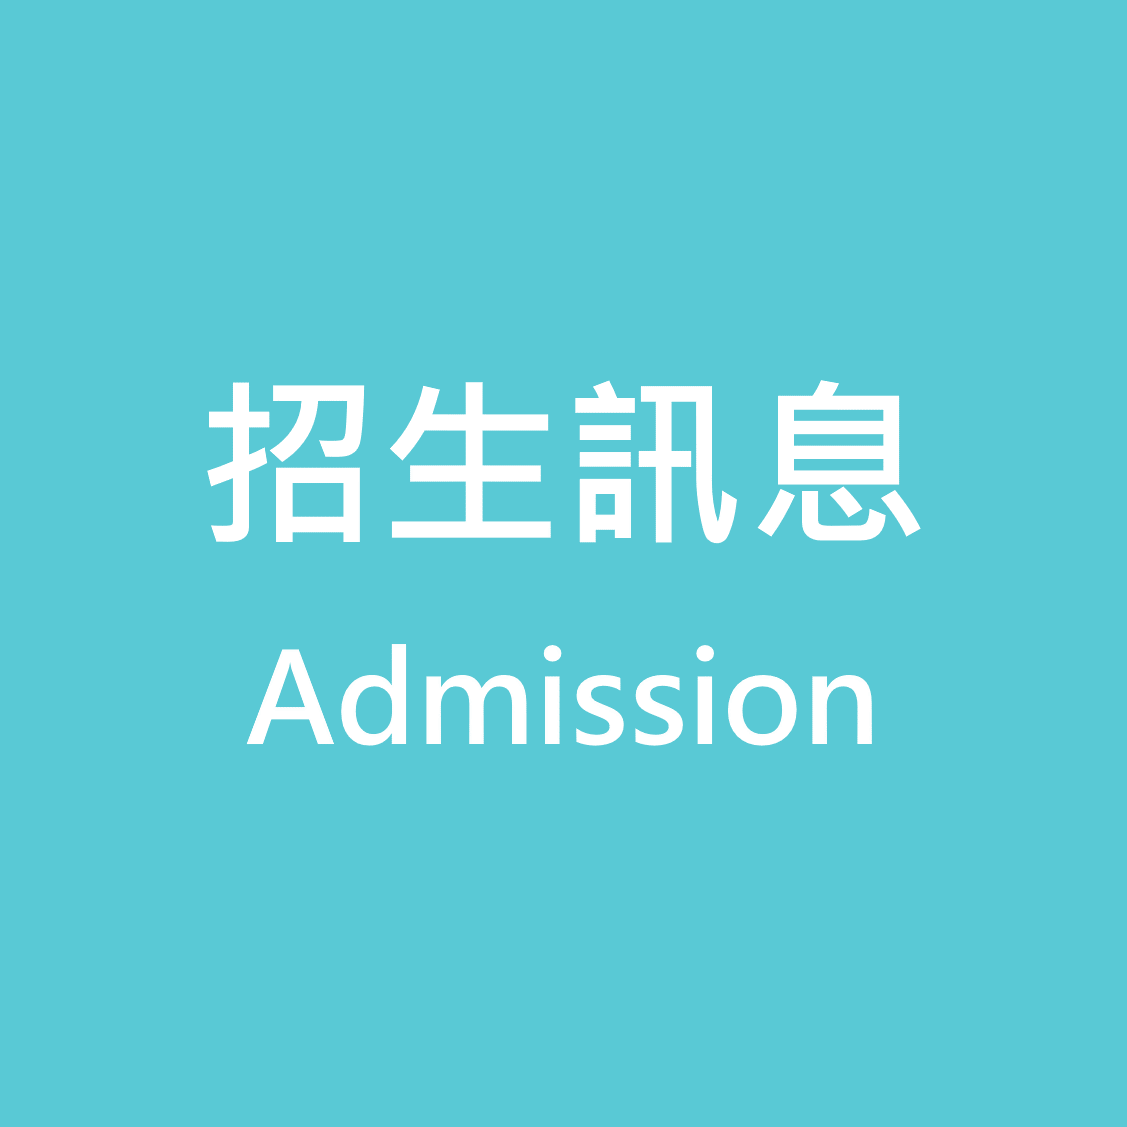 Admission(Open new window)